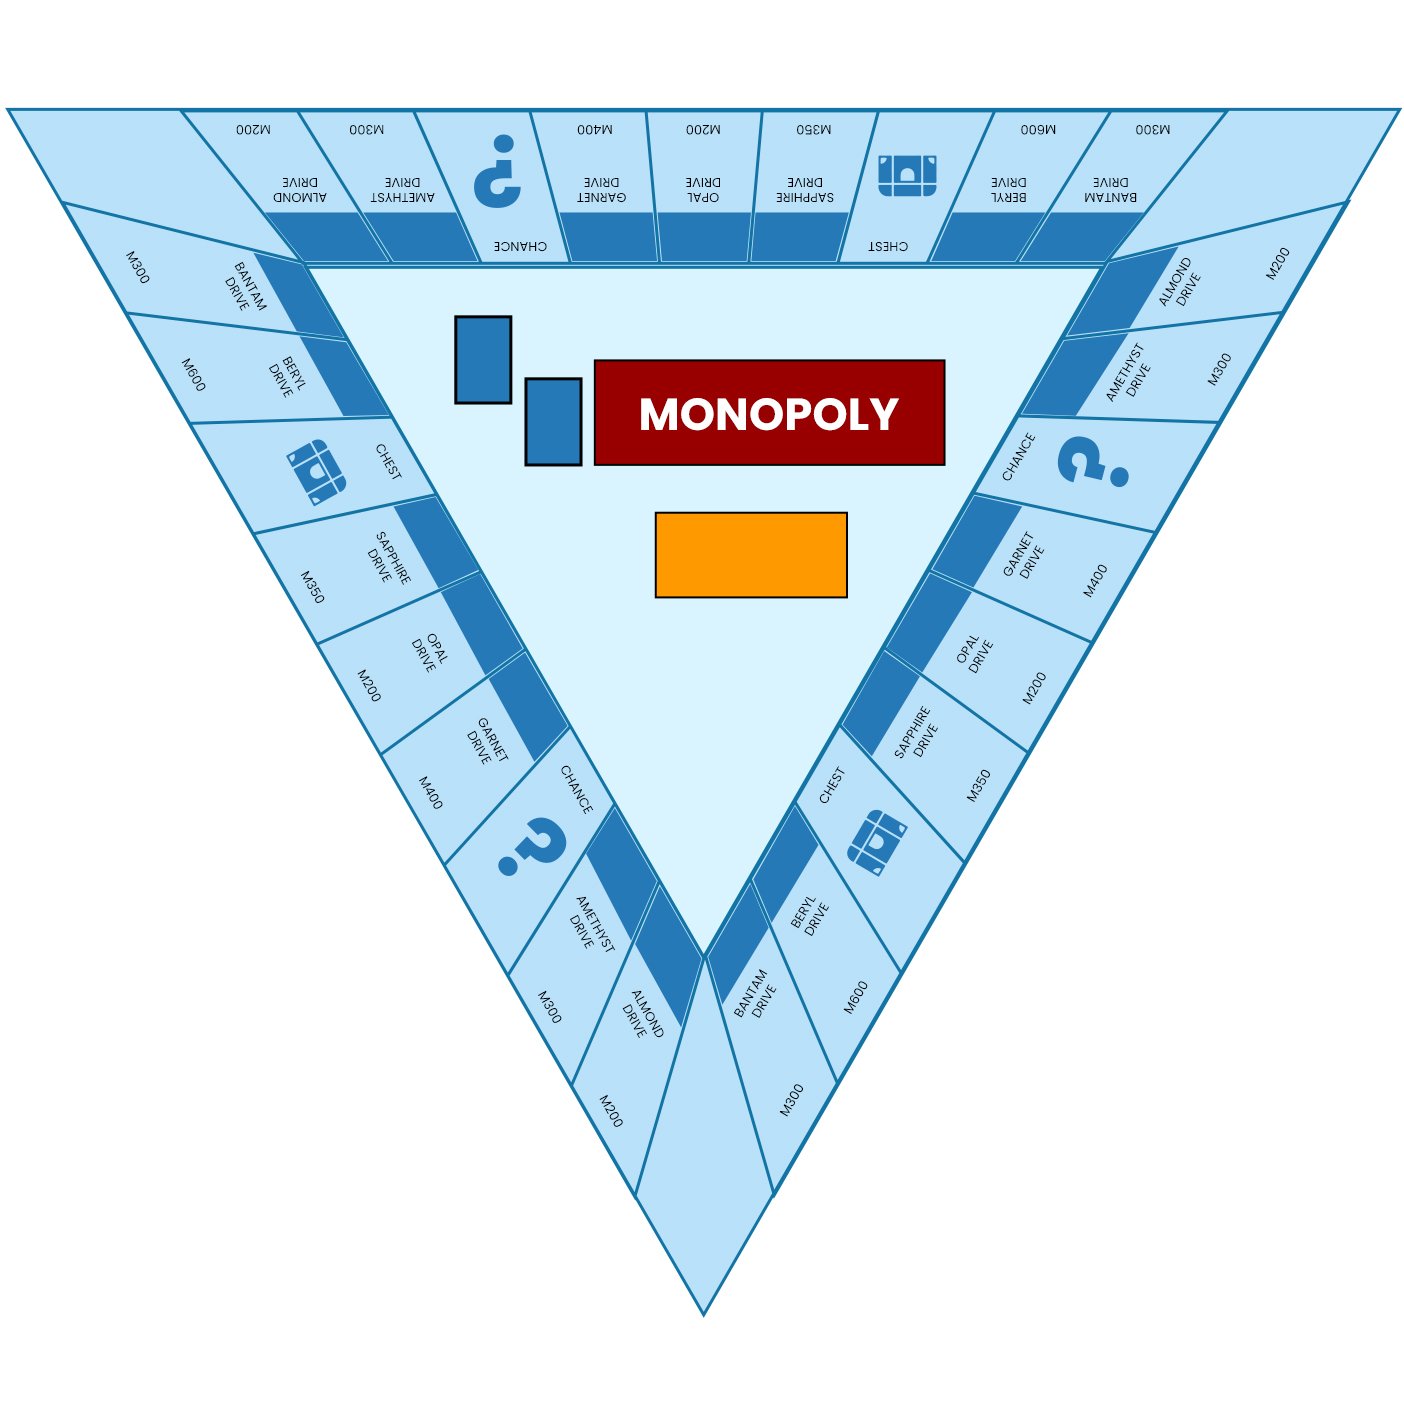 Free Triangle Monopoly Template in PDF, Illustrator, PSD, SVG